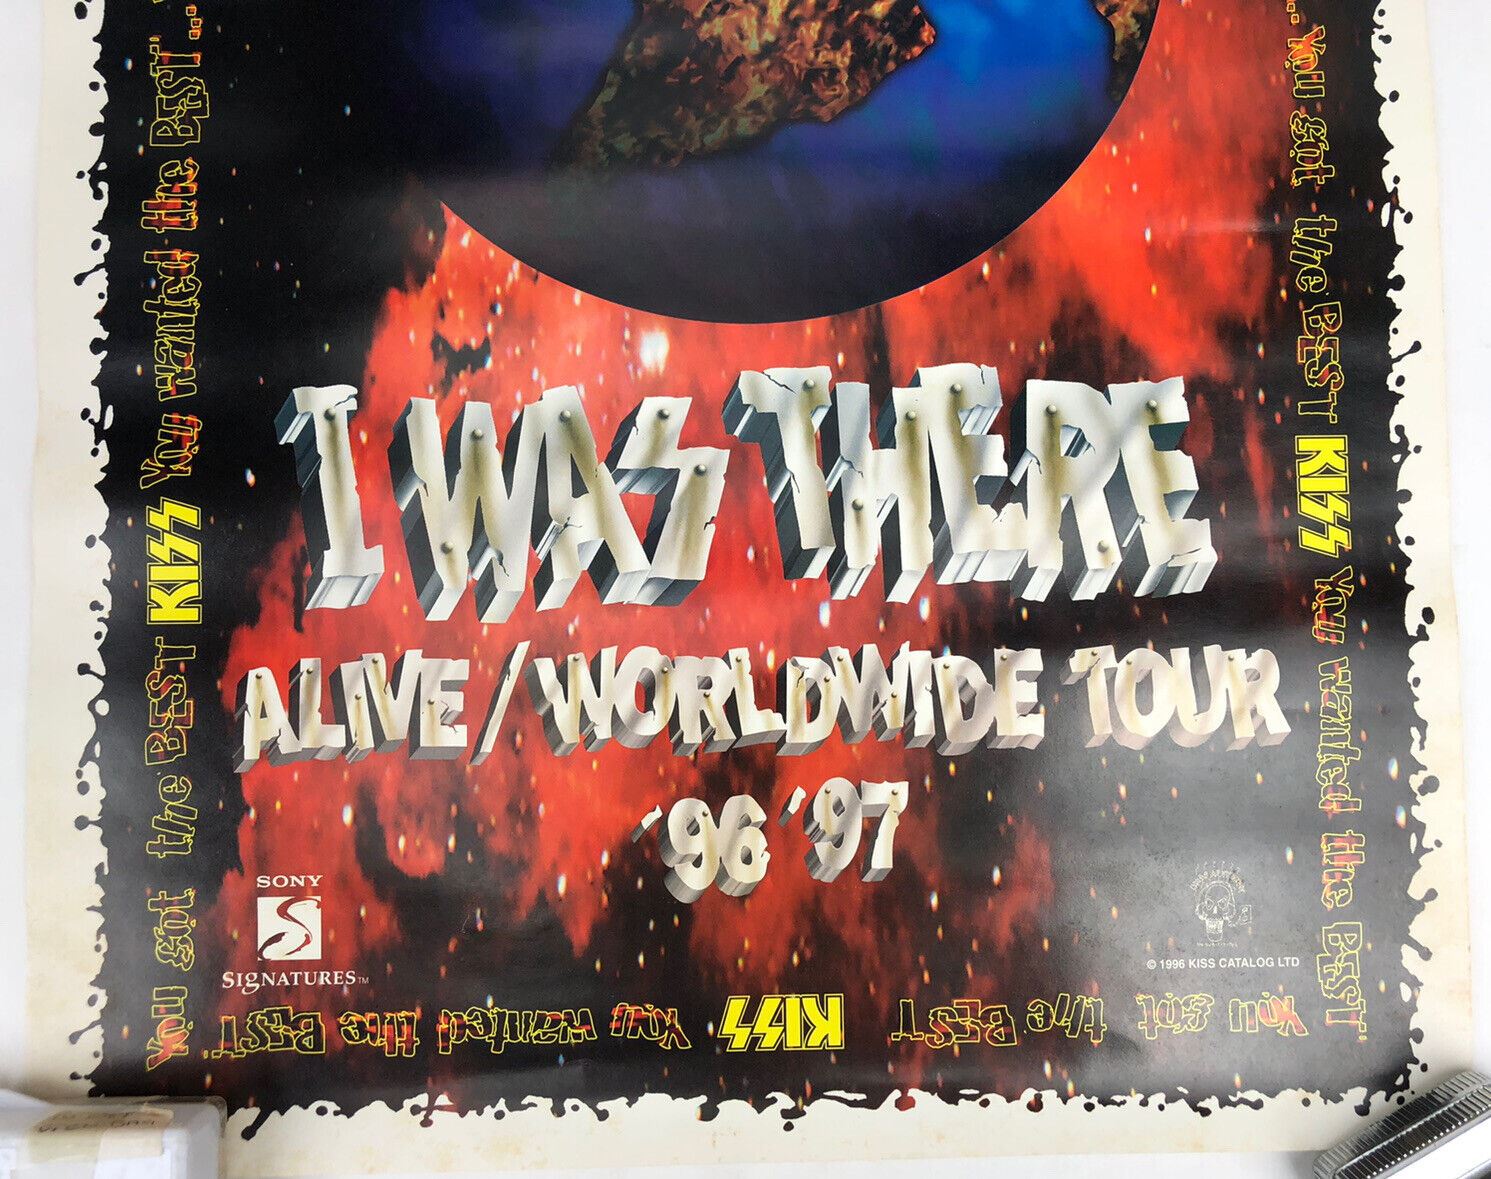 Original Vintage 1996 KISS Poster I WAS THERE ALIVE / WORLDWIDE 